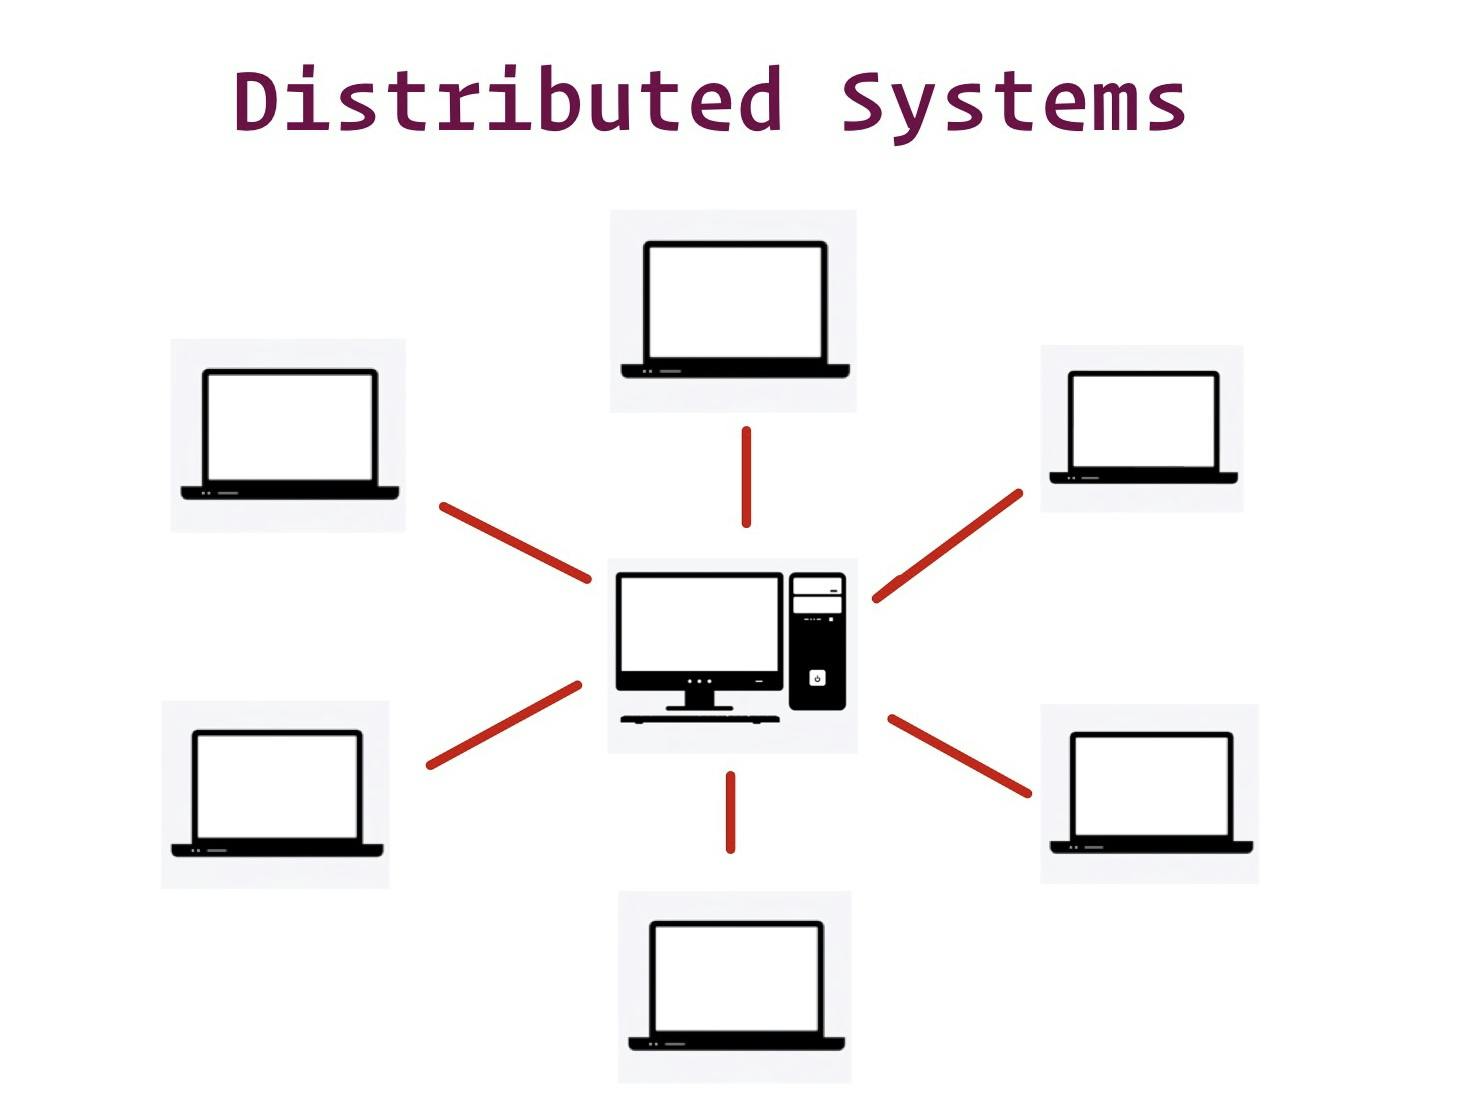 hero of "Distributed Systems: Key Concepts and Challenges"